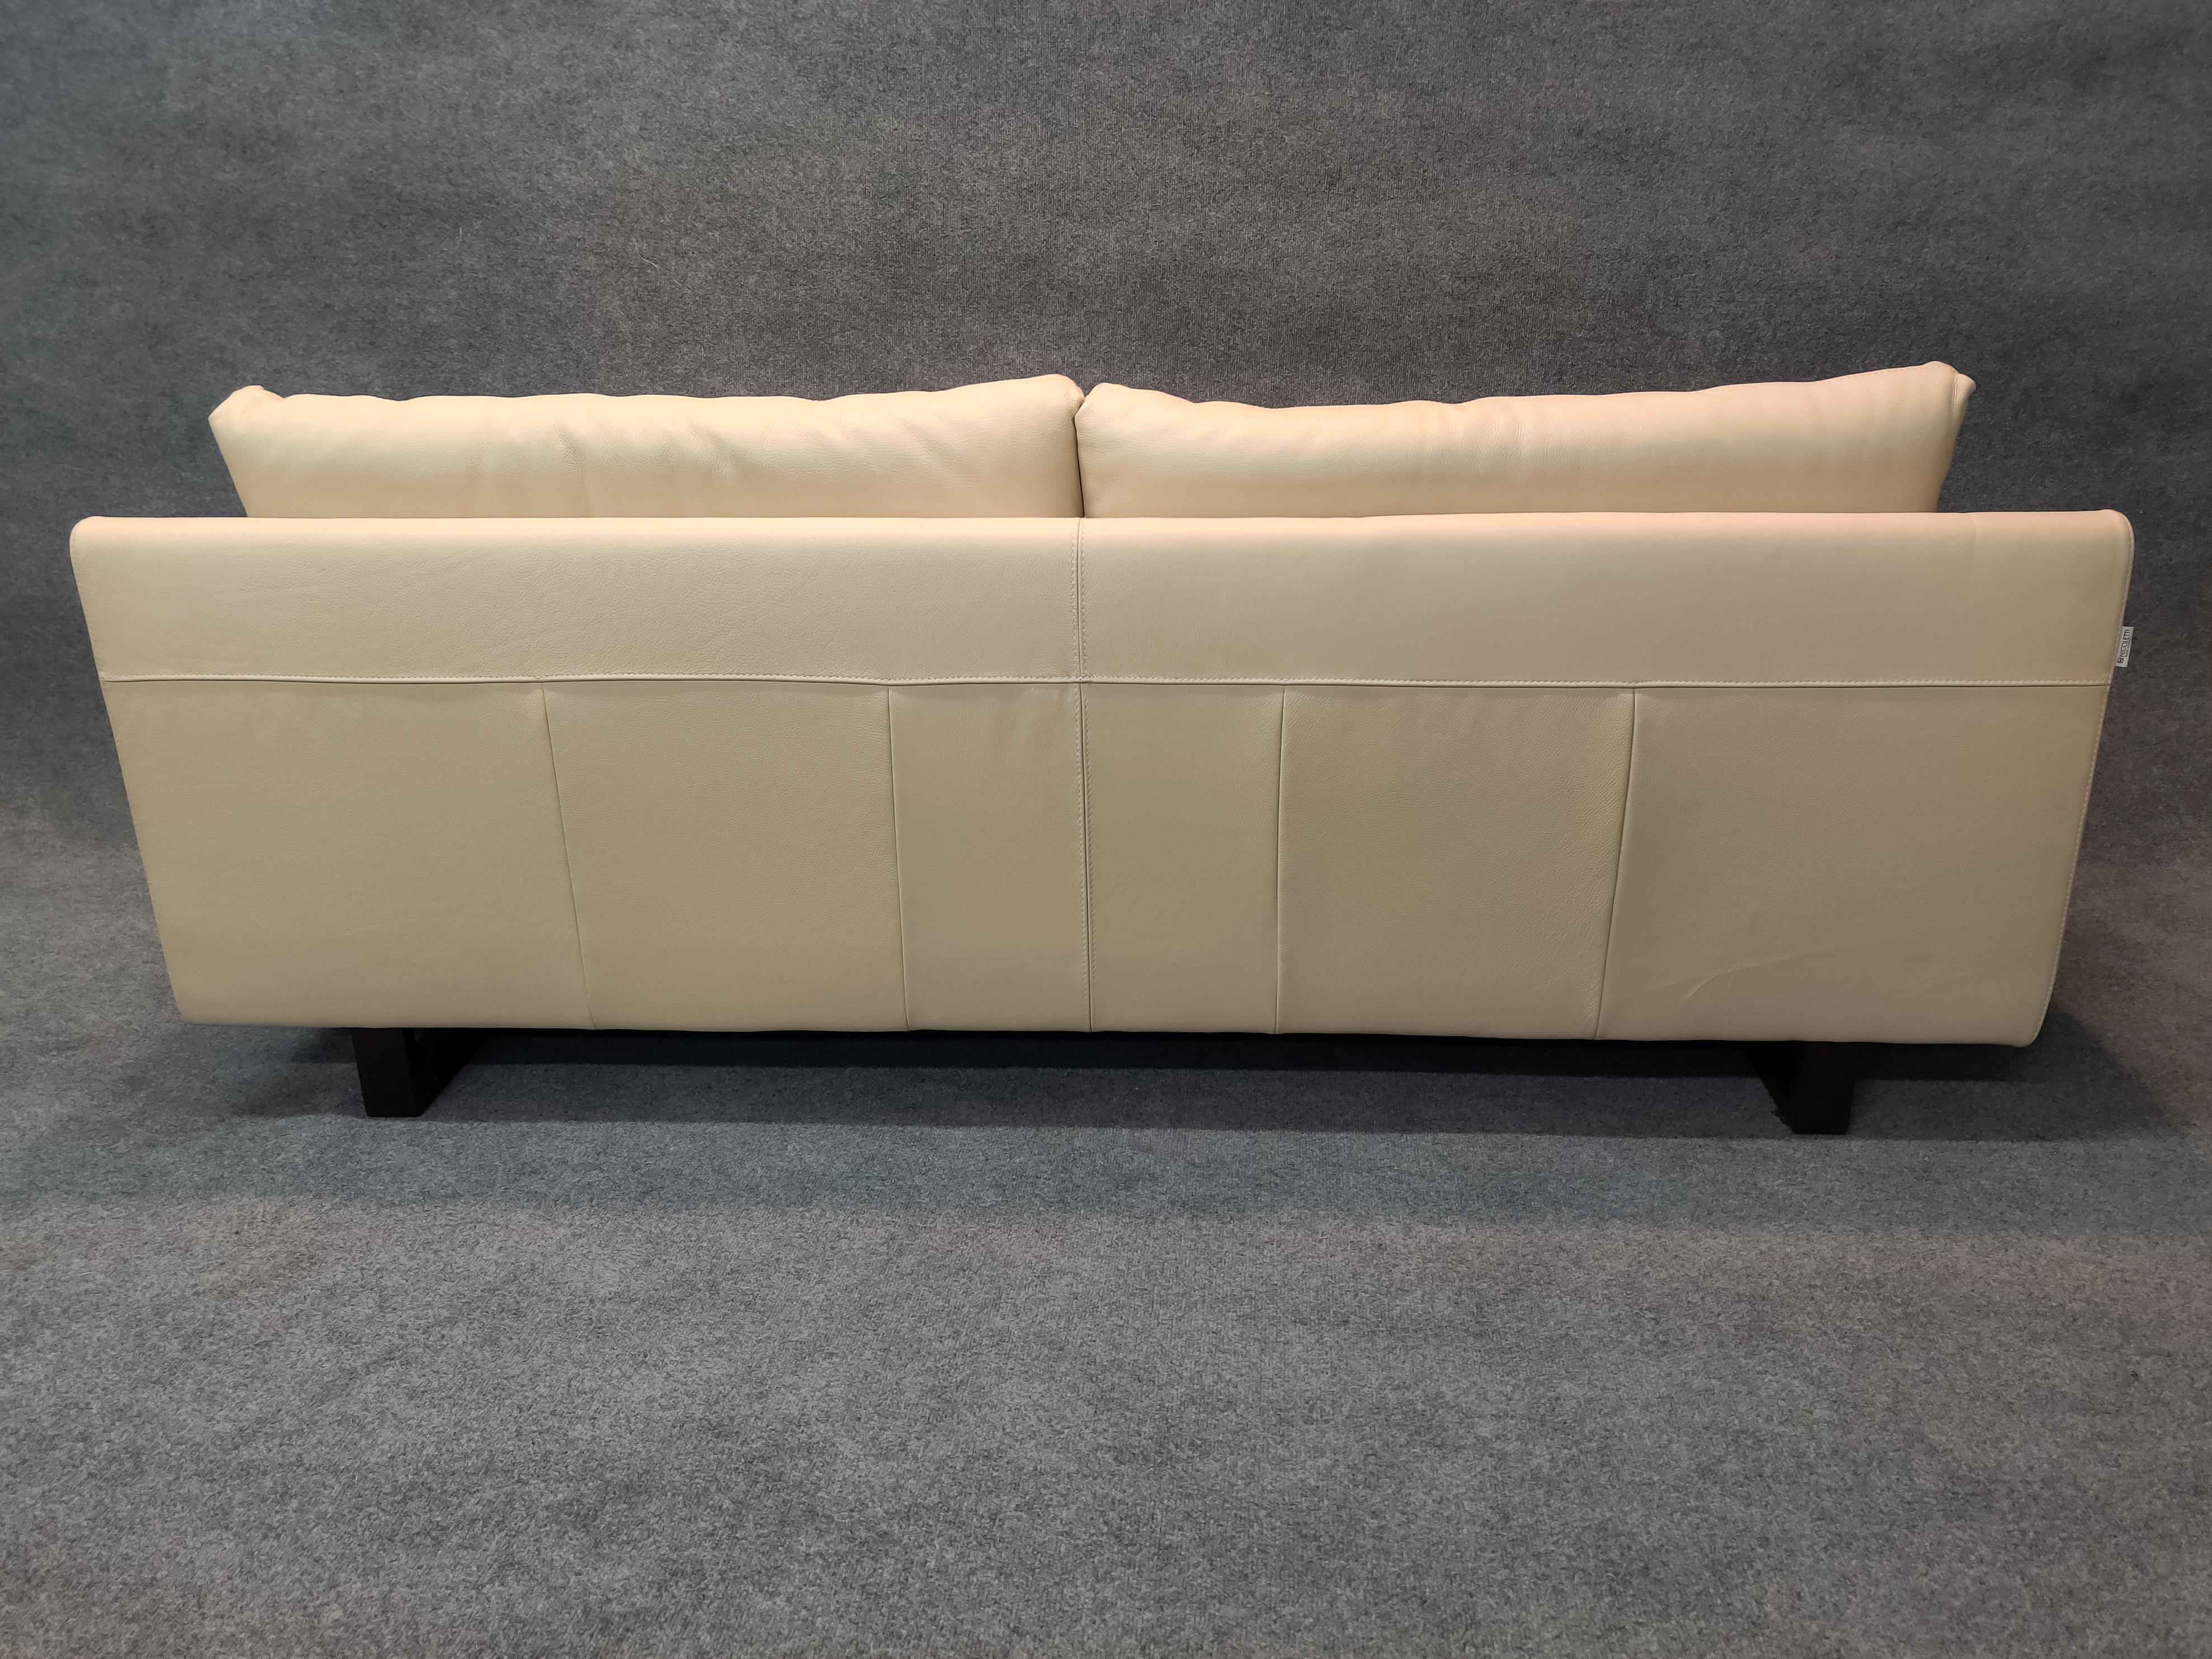 Post-Modern & Sleek Fine Top-Grain Off-White Leather Sofa by Nicoletti of Italy 3